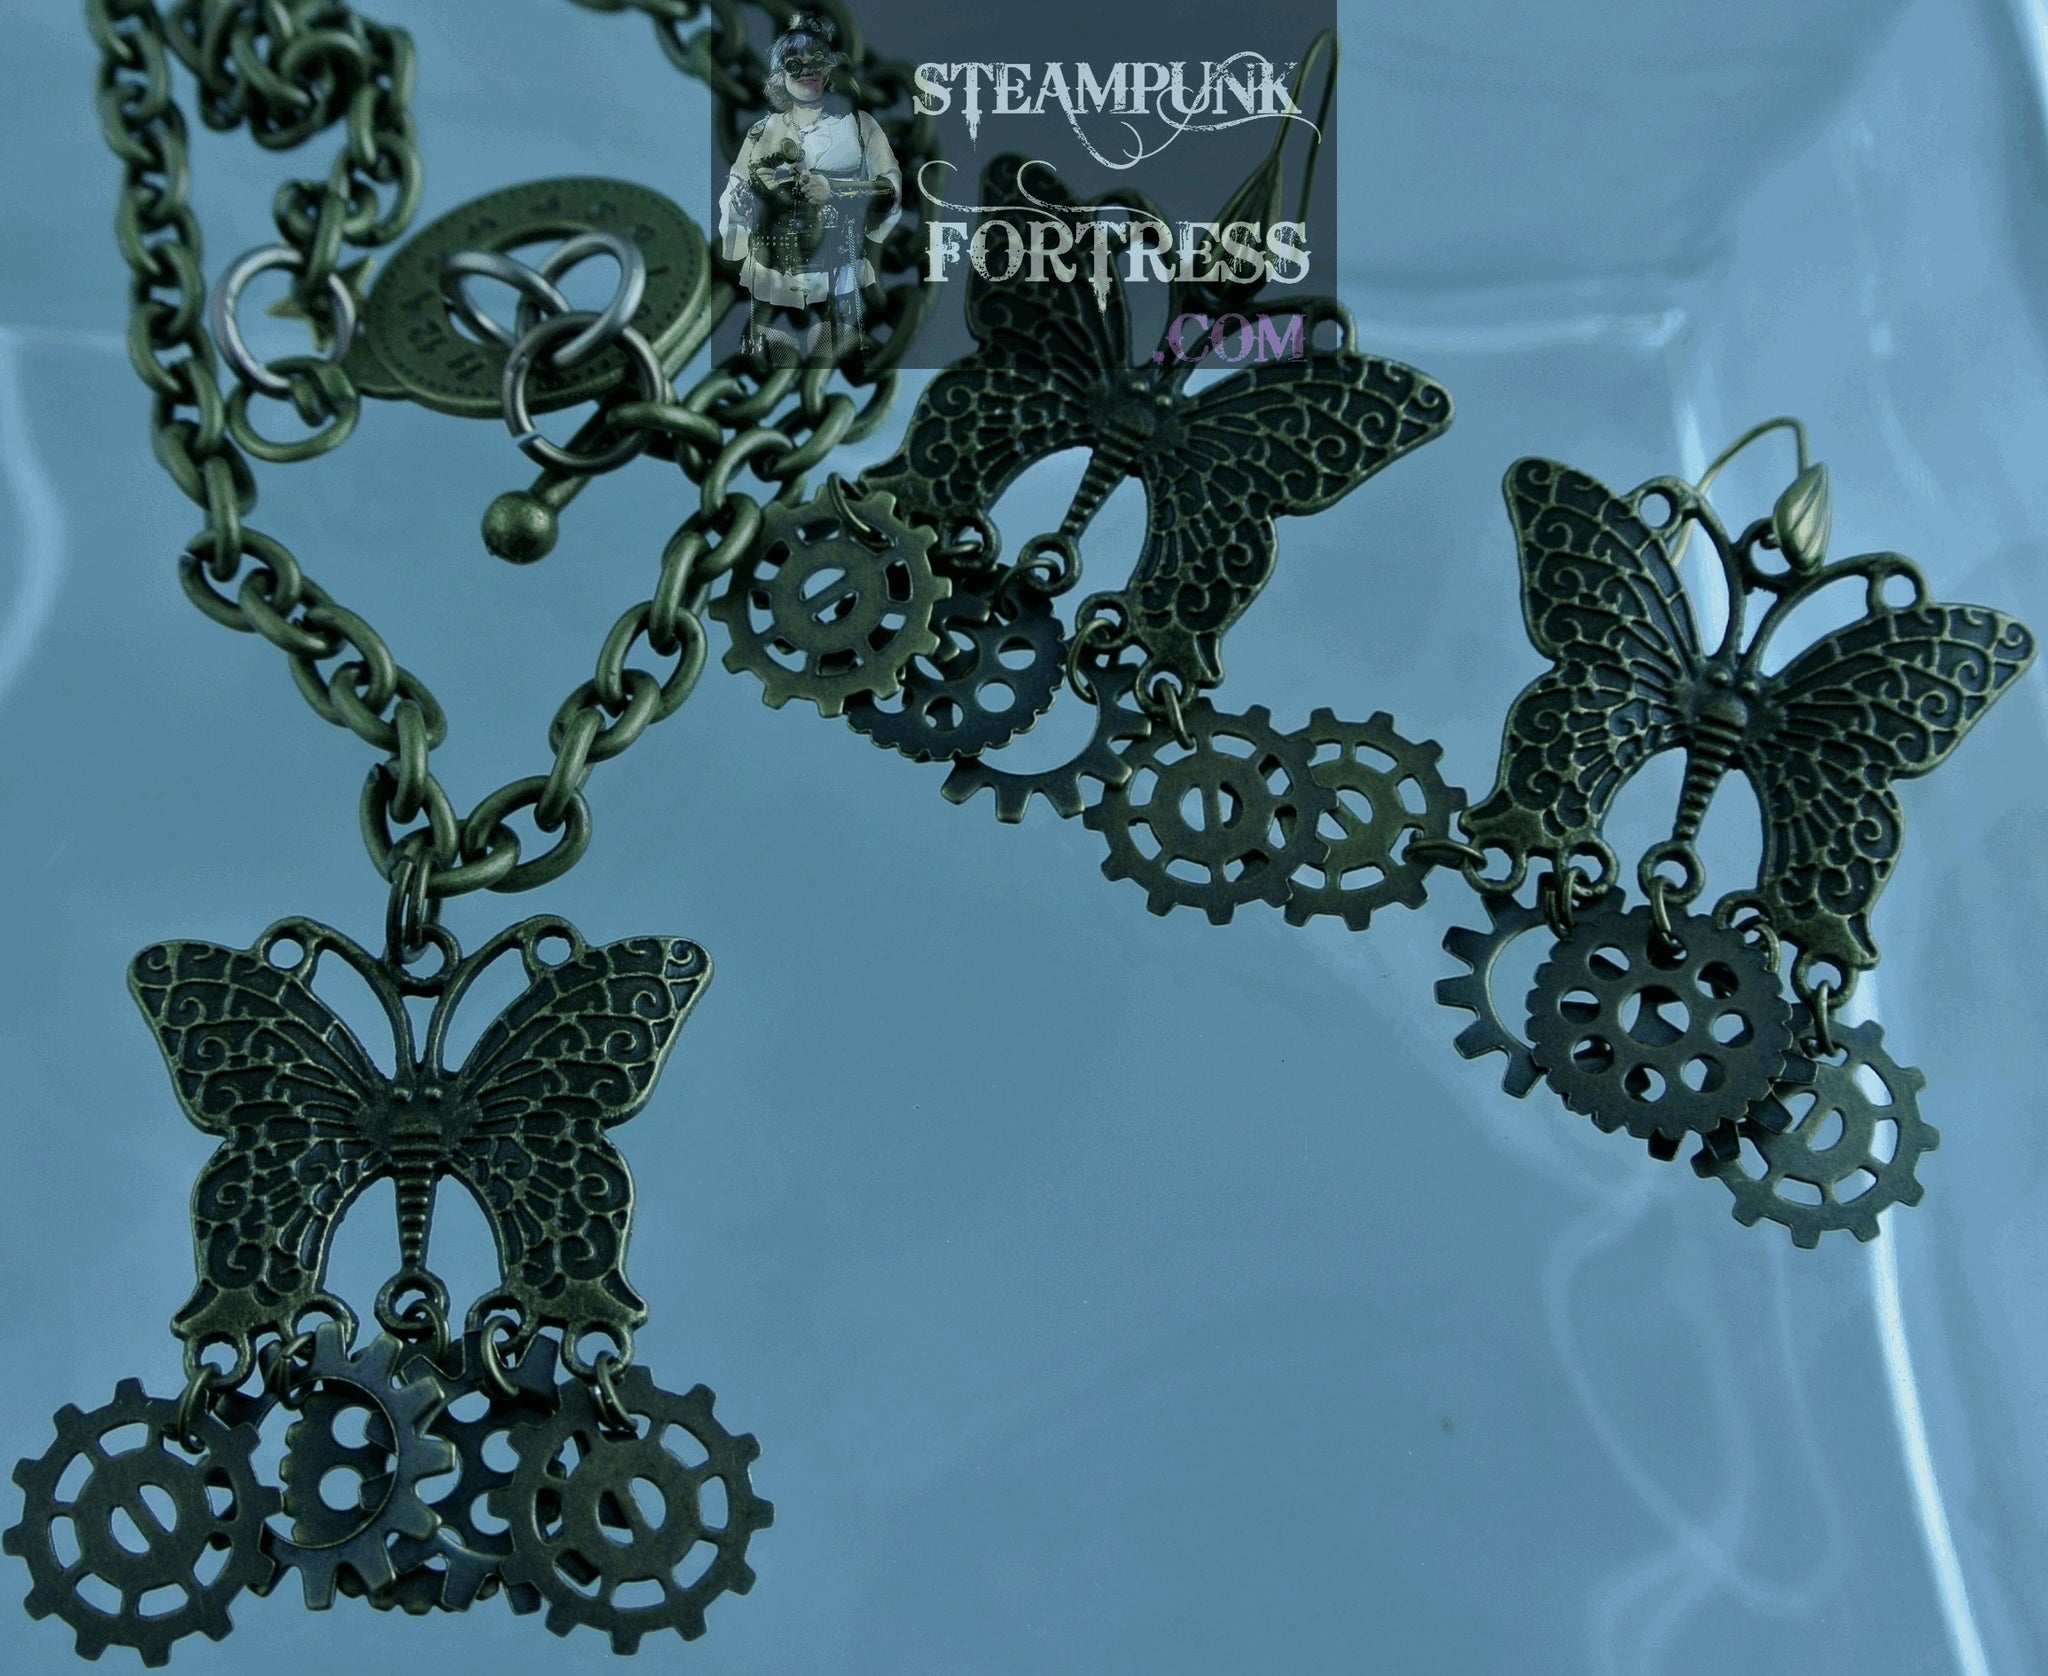 BRASS BUTTERFLY DROP 5 GEARS NECKLACE SET AVAILABLE STARR WILDE STEAMPUNK FORTRESS